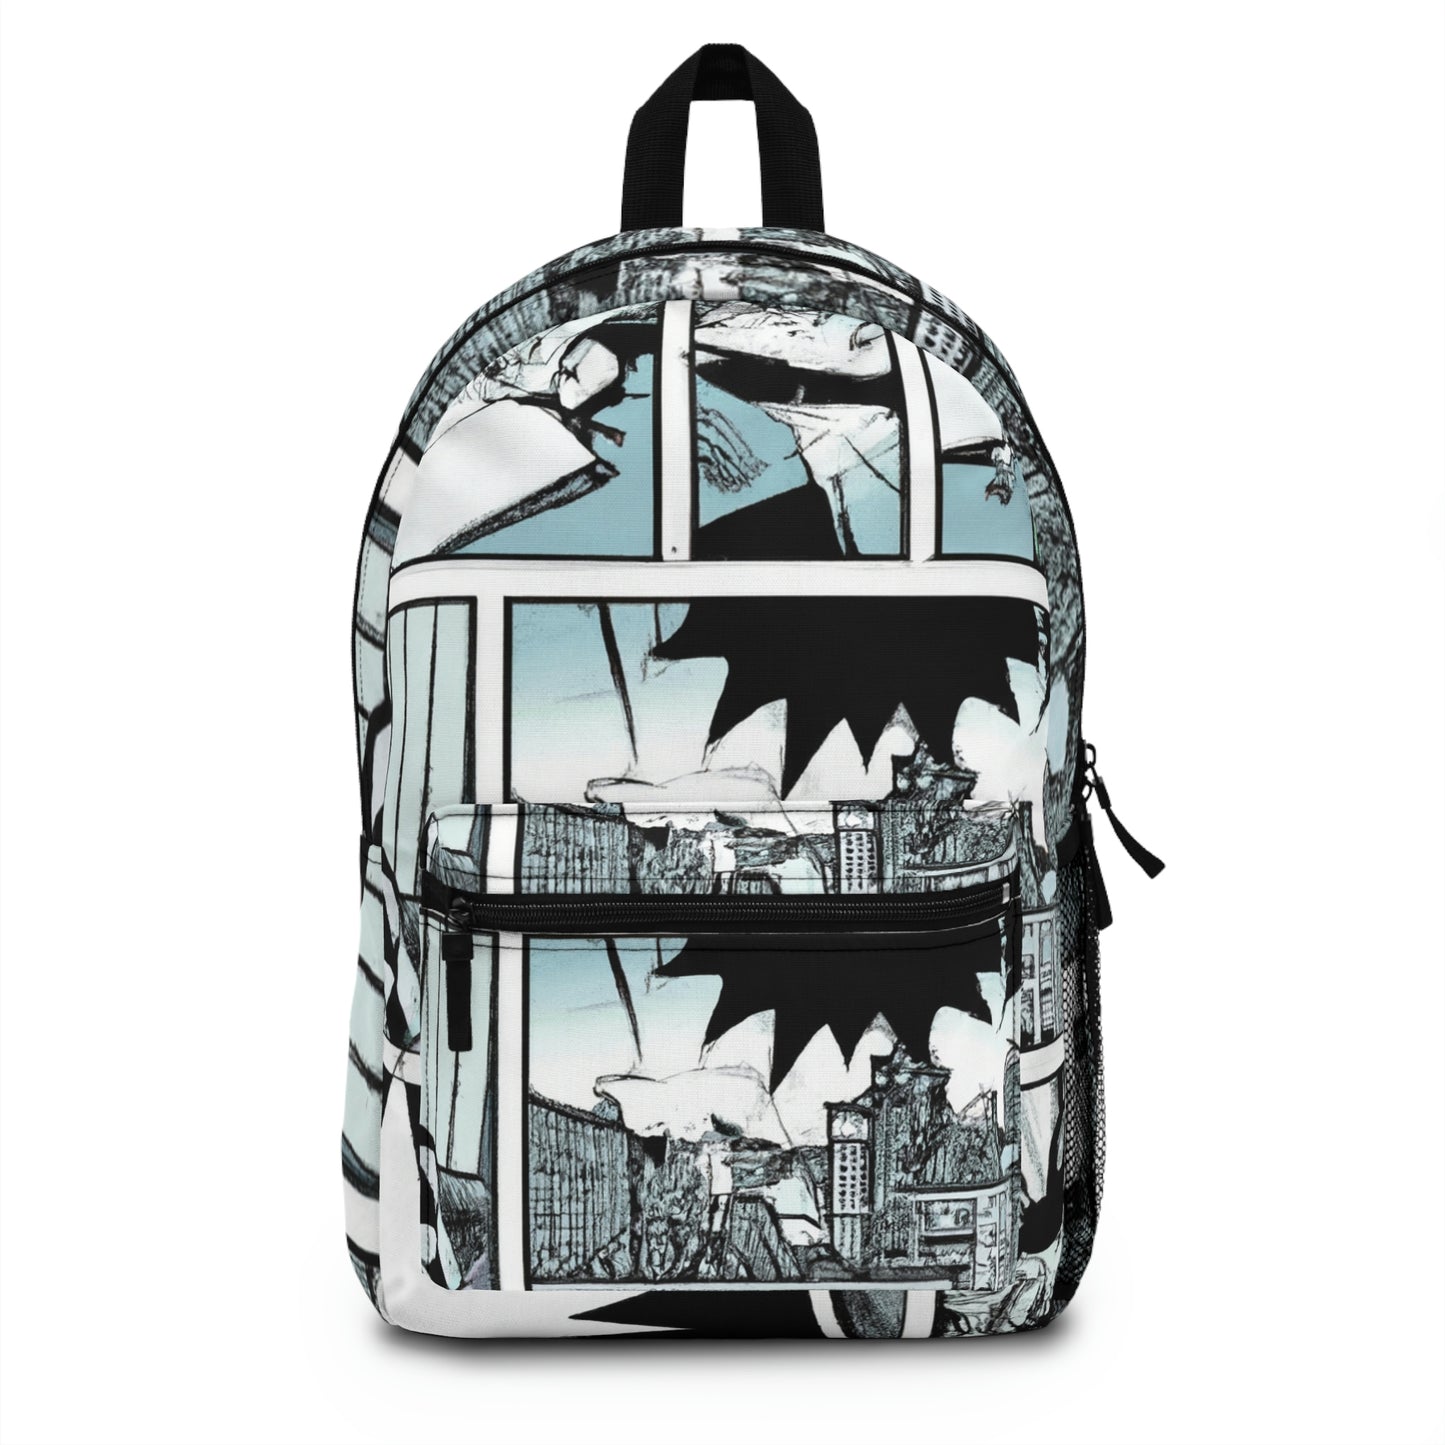 Galactic Guardian Galkythe - Comic Book Backpack